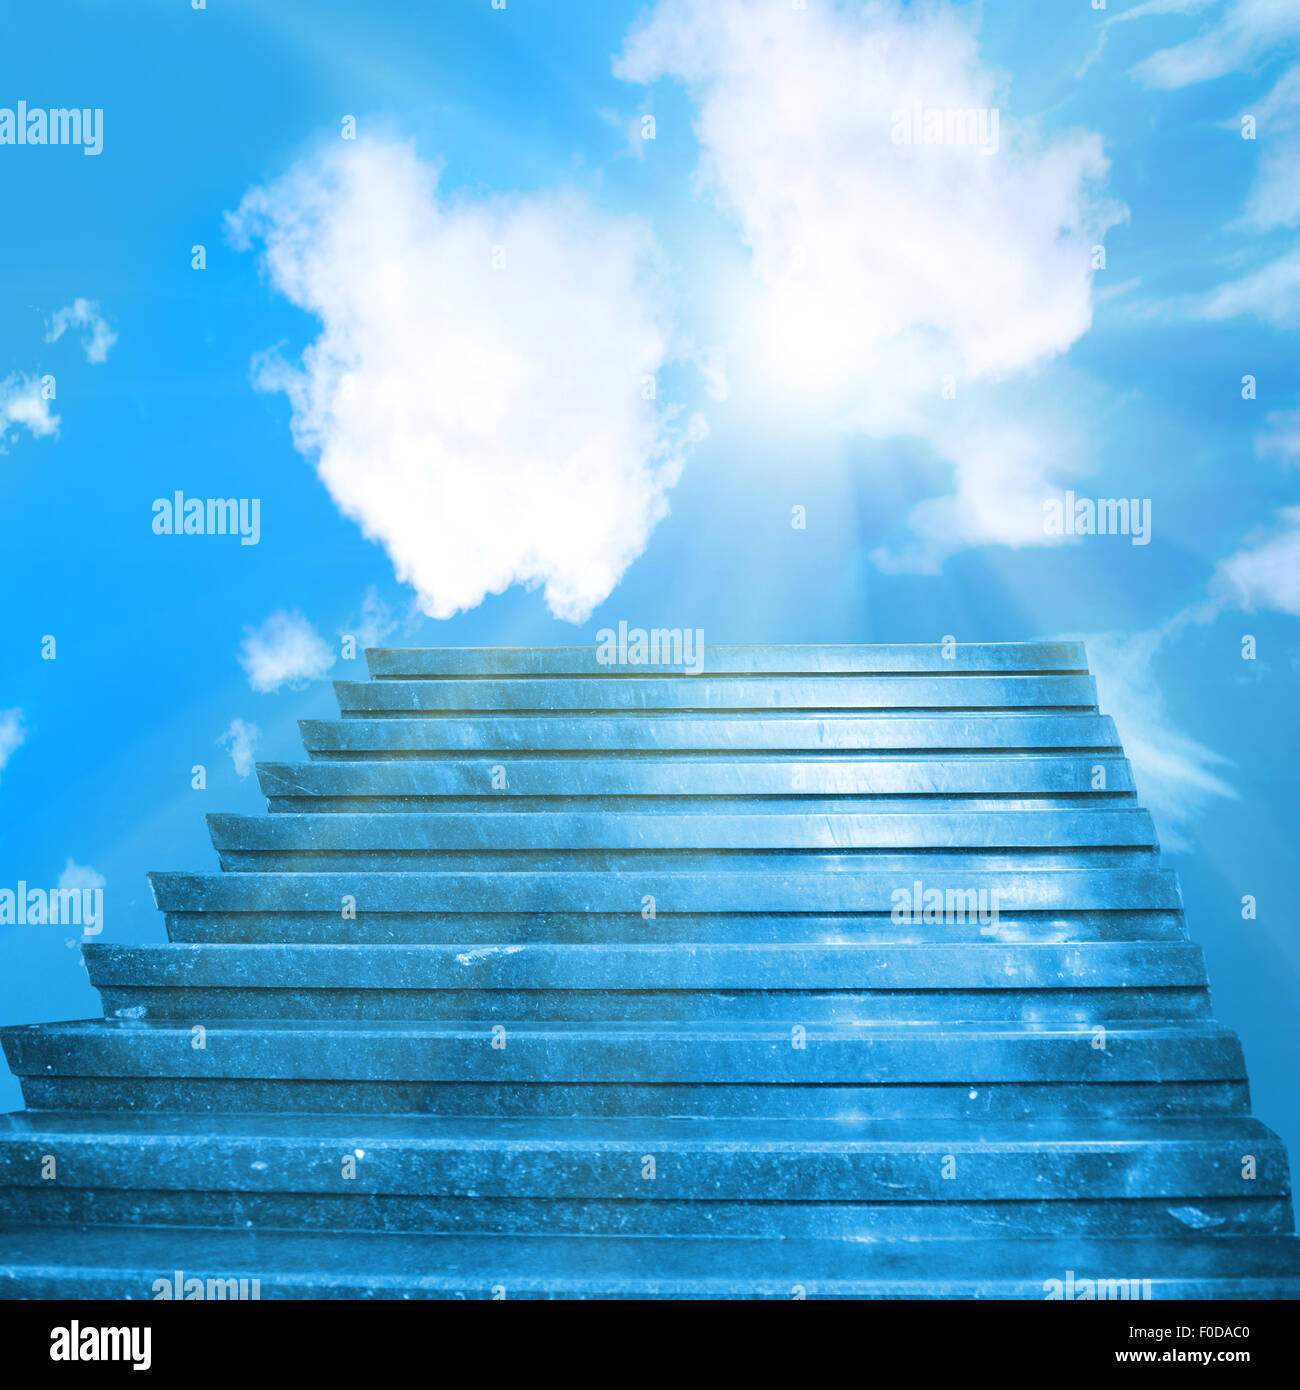 Stairway to Heaven. Stairs in sky. Concept with sun and clouds